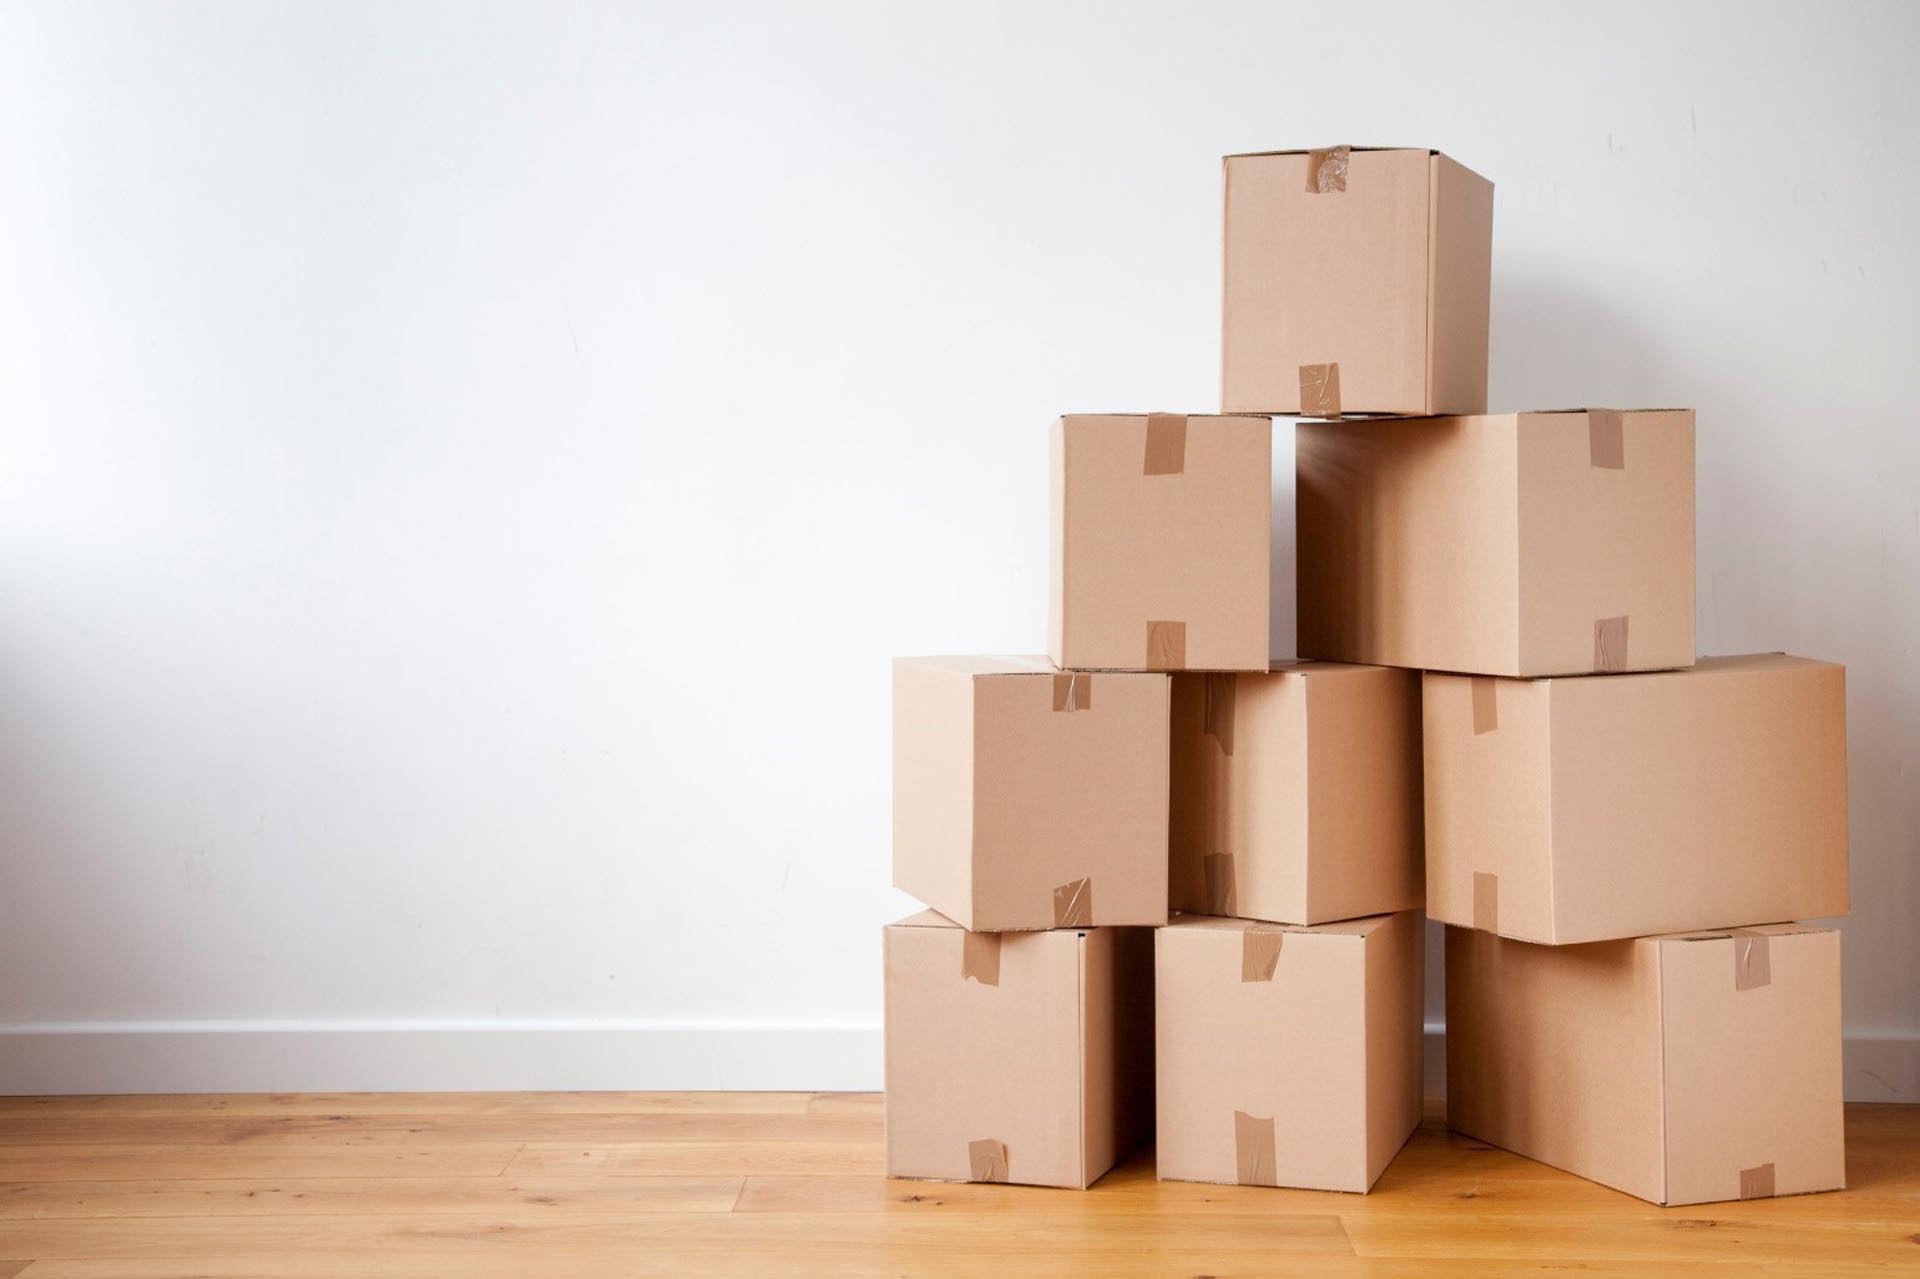 Tips for Choosing Every Item's Perfect Moving Box